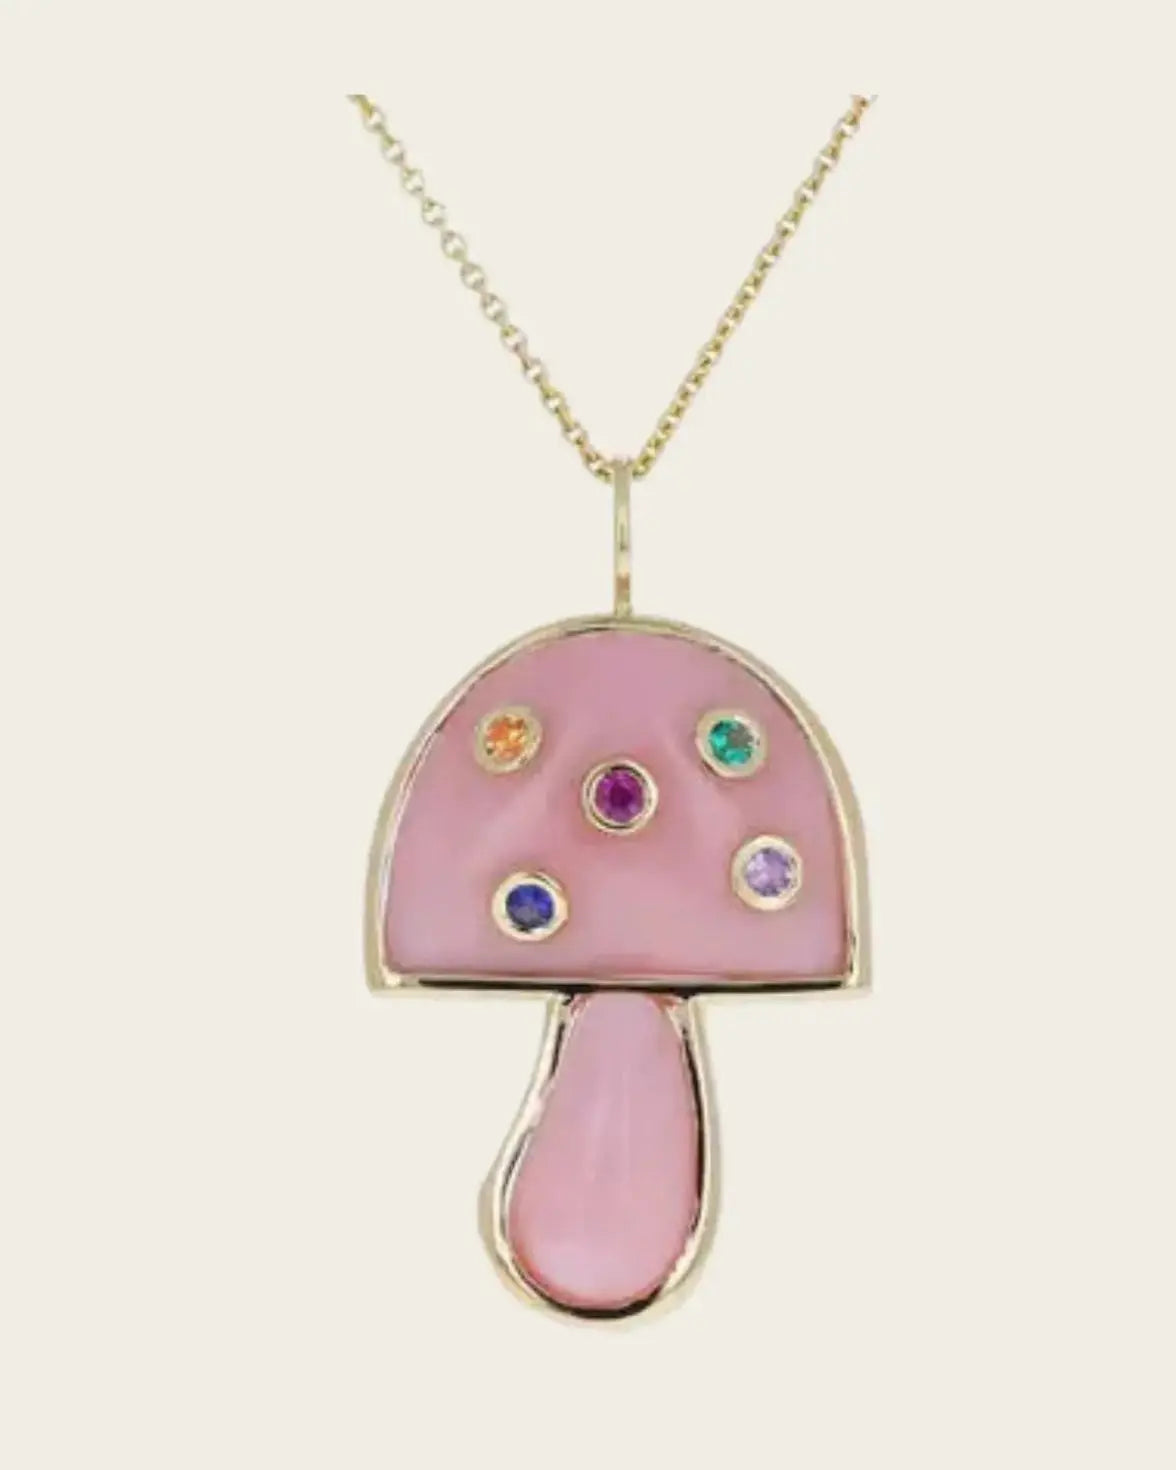 Brent Neale Pink Opal and Sapphire Mini Mushroom Necklace Brent Neale Pink Opal and Sapphire Mini Mushroom Necklace Brent Neale Brent Neale  Squash Blossom Vail